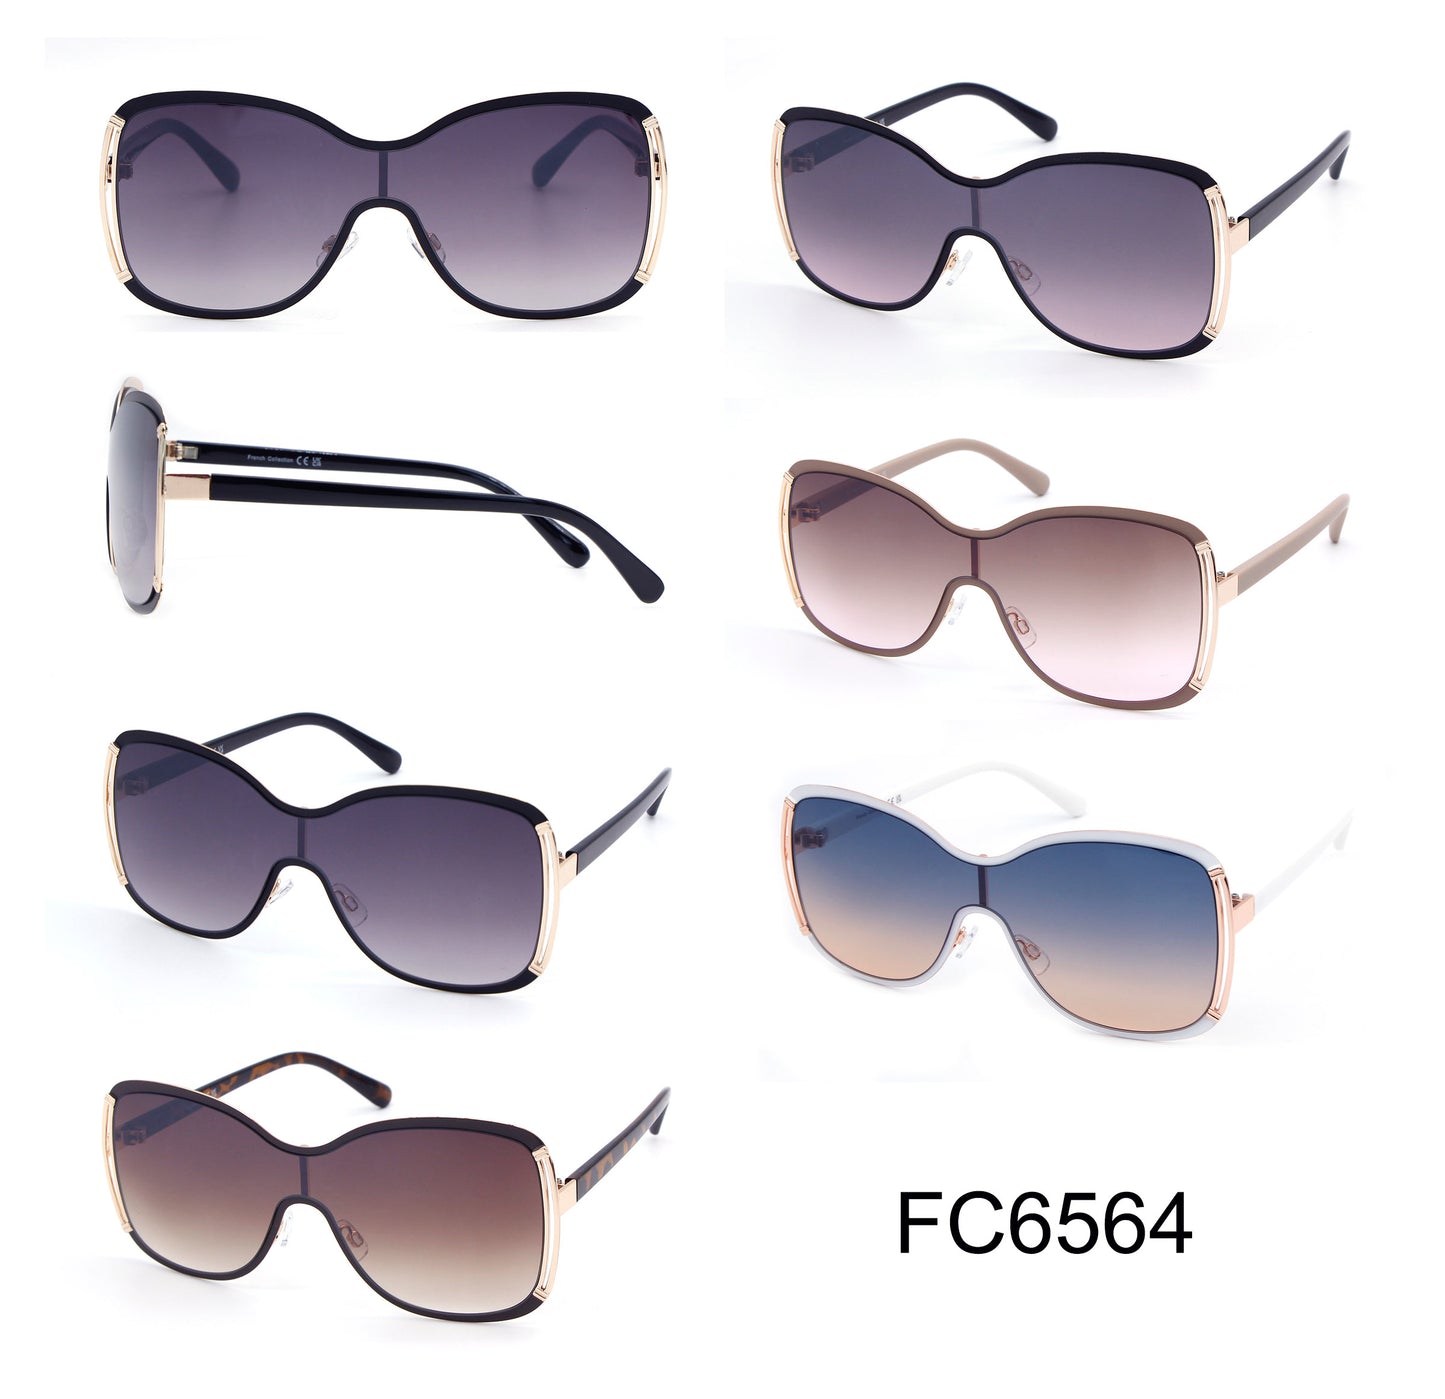 FC 6564 - Metal One Piece Butterfly Sunglasses